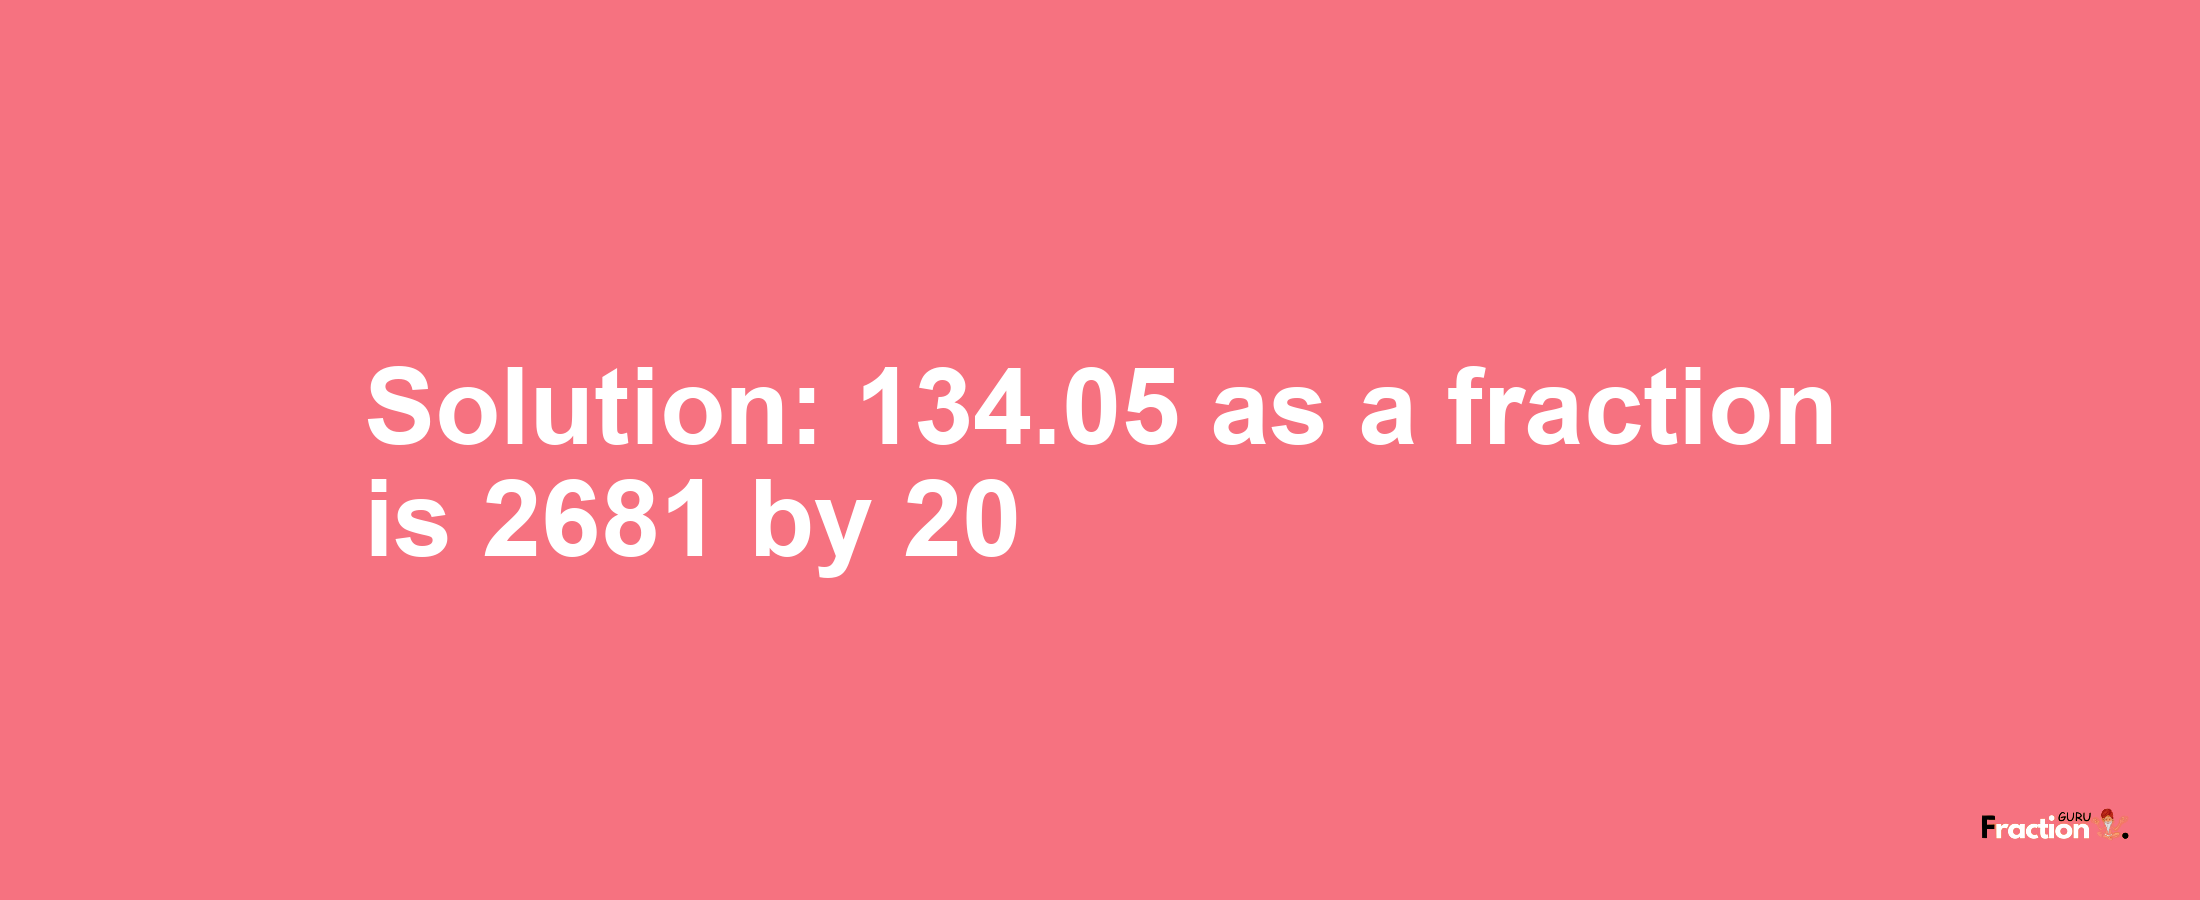 Solution:134.05 as a fraction is 2681/20